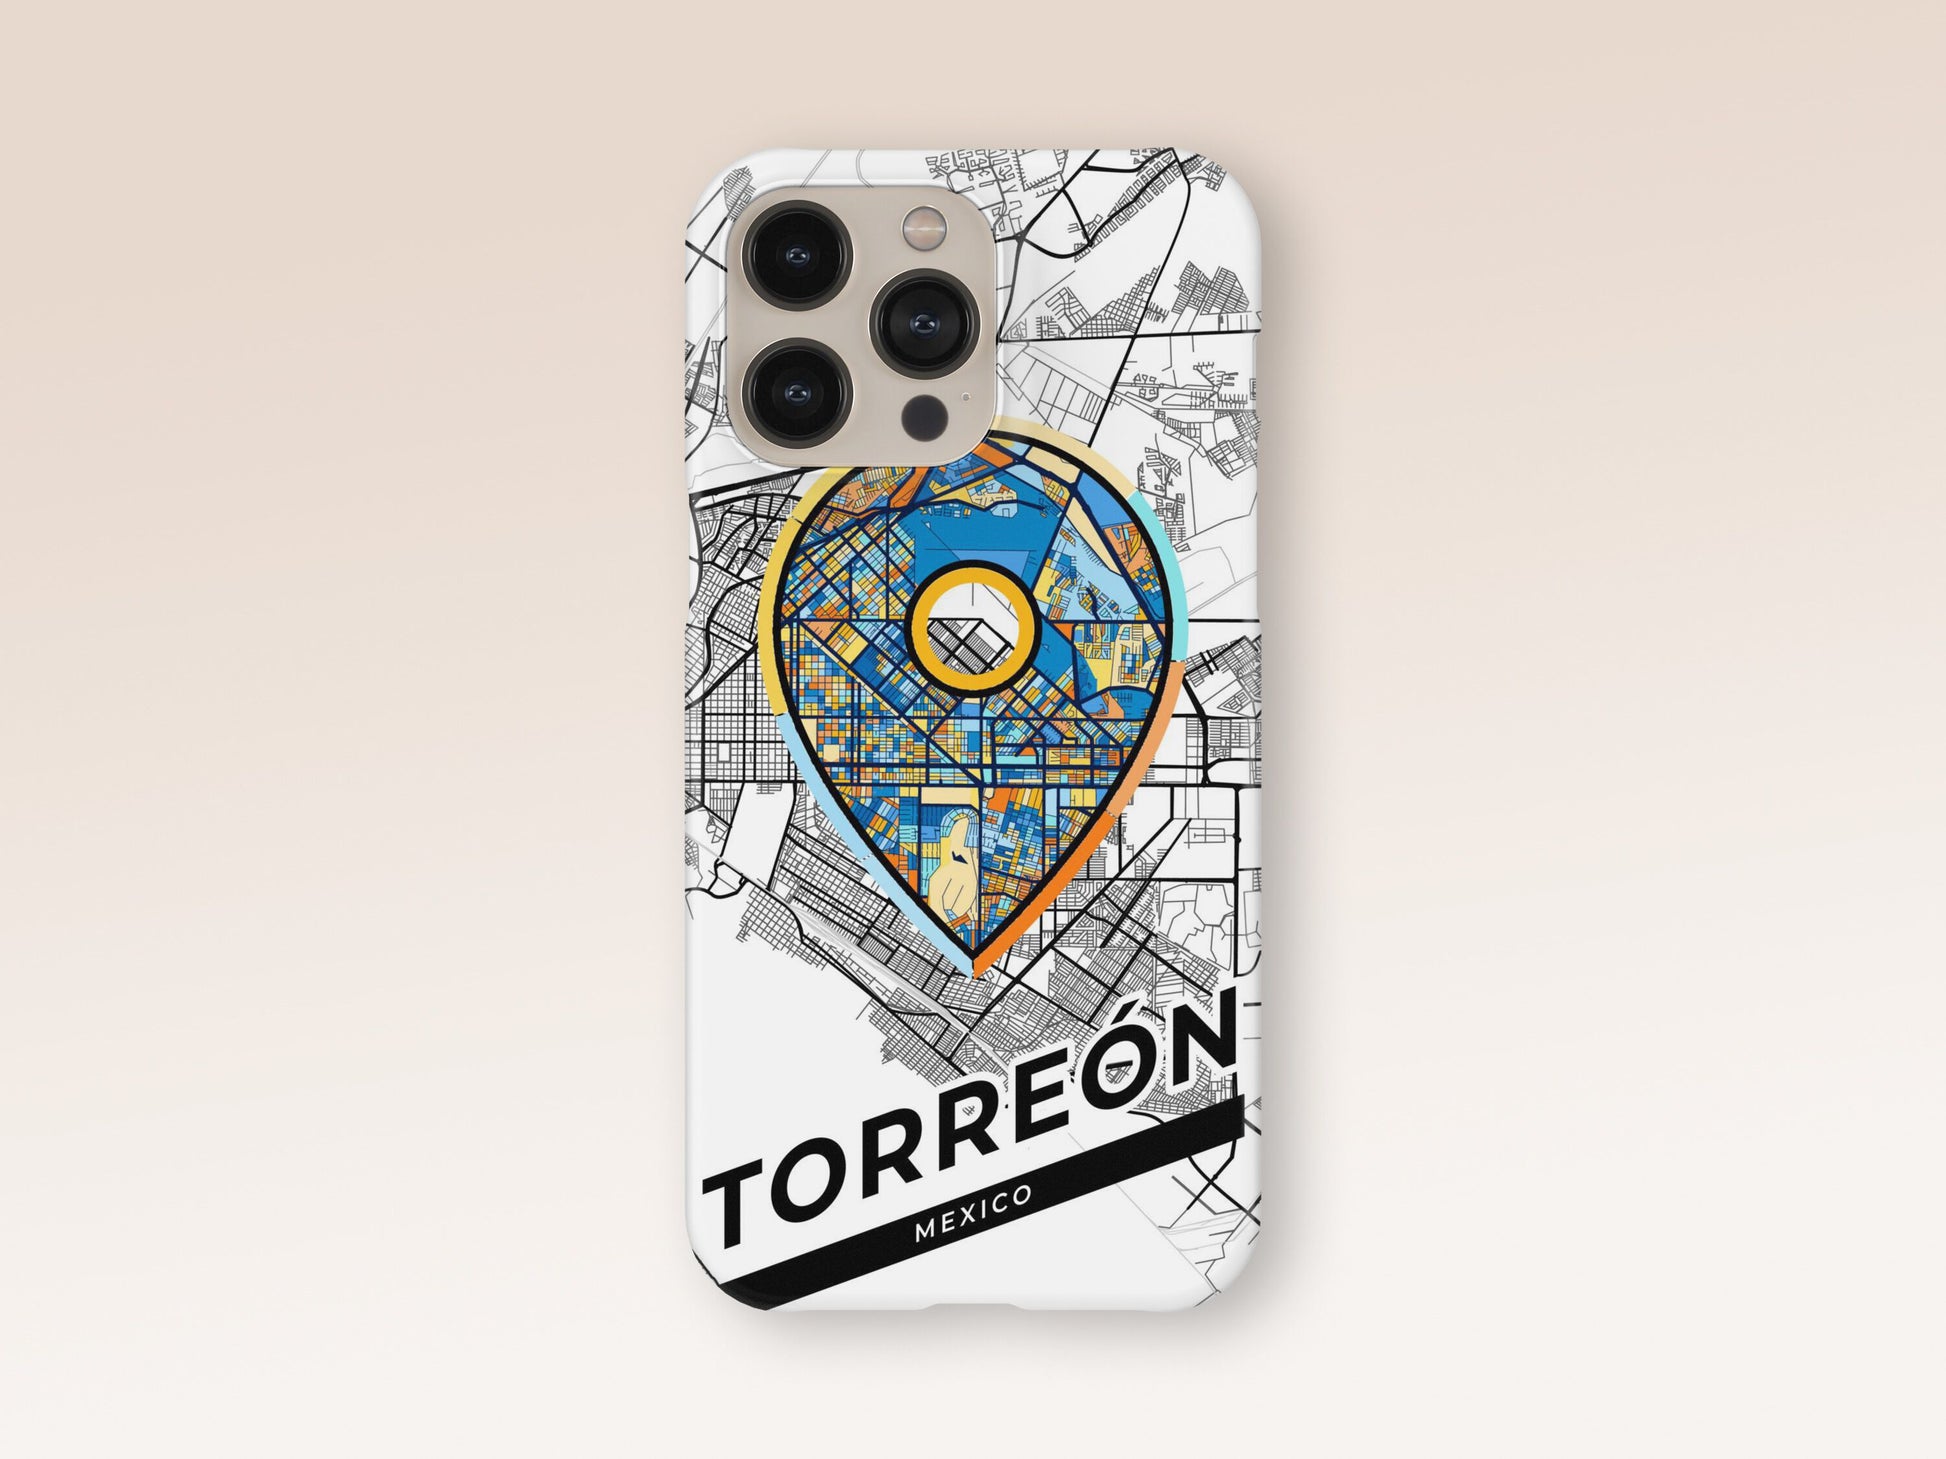 Torreón Mexico slim phone case with colorful icon 1